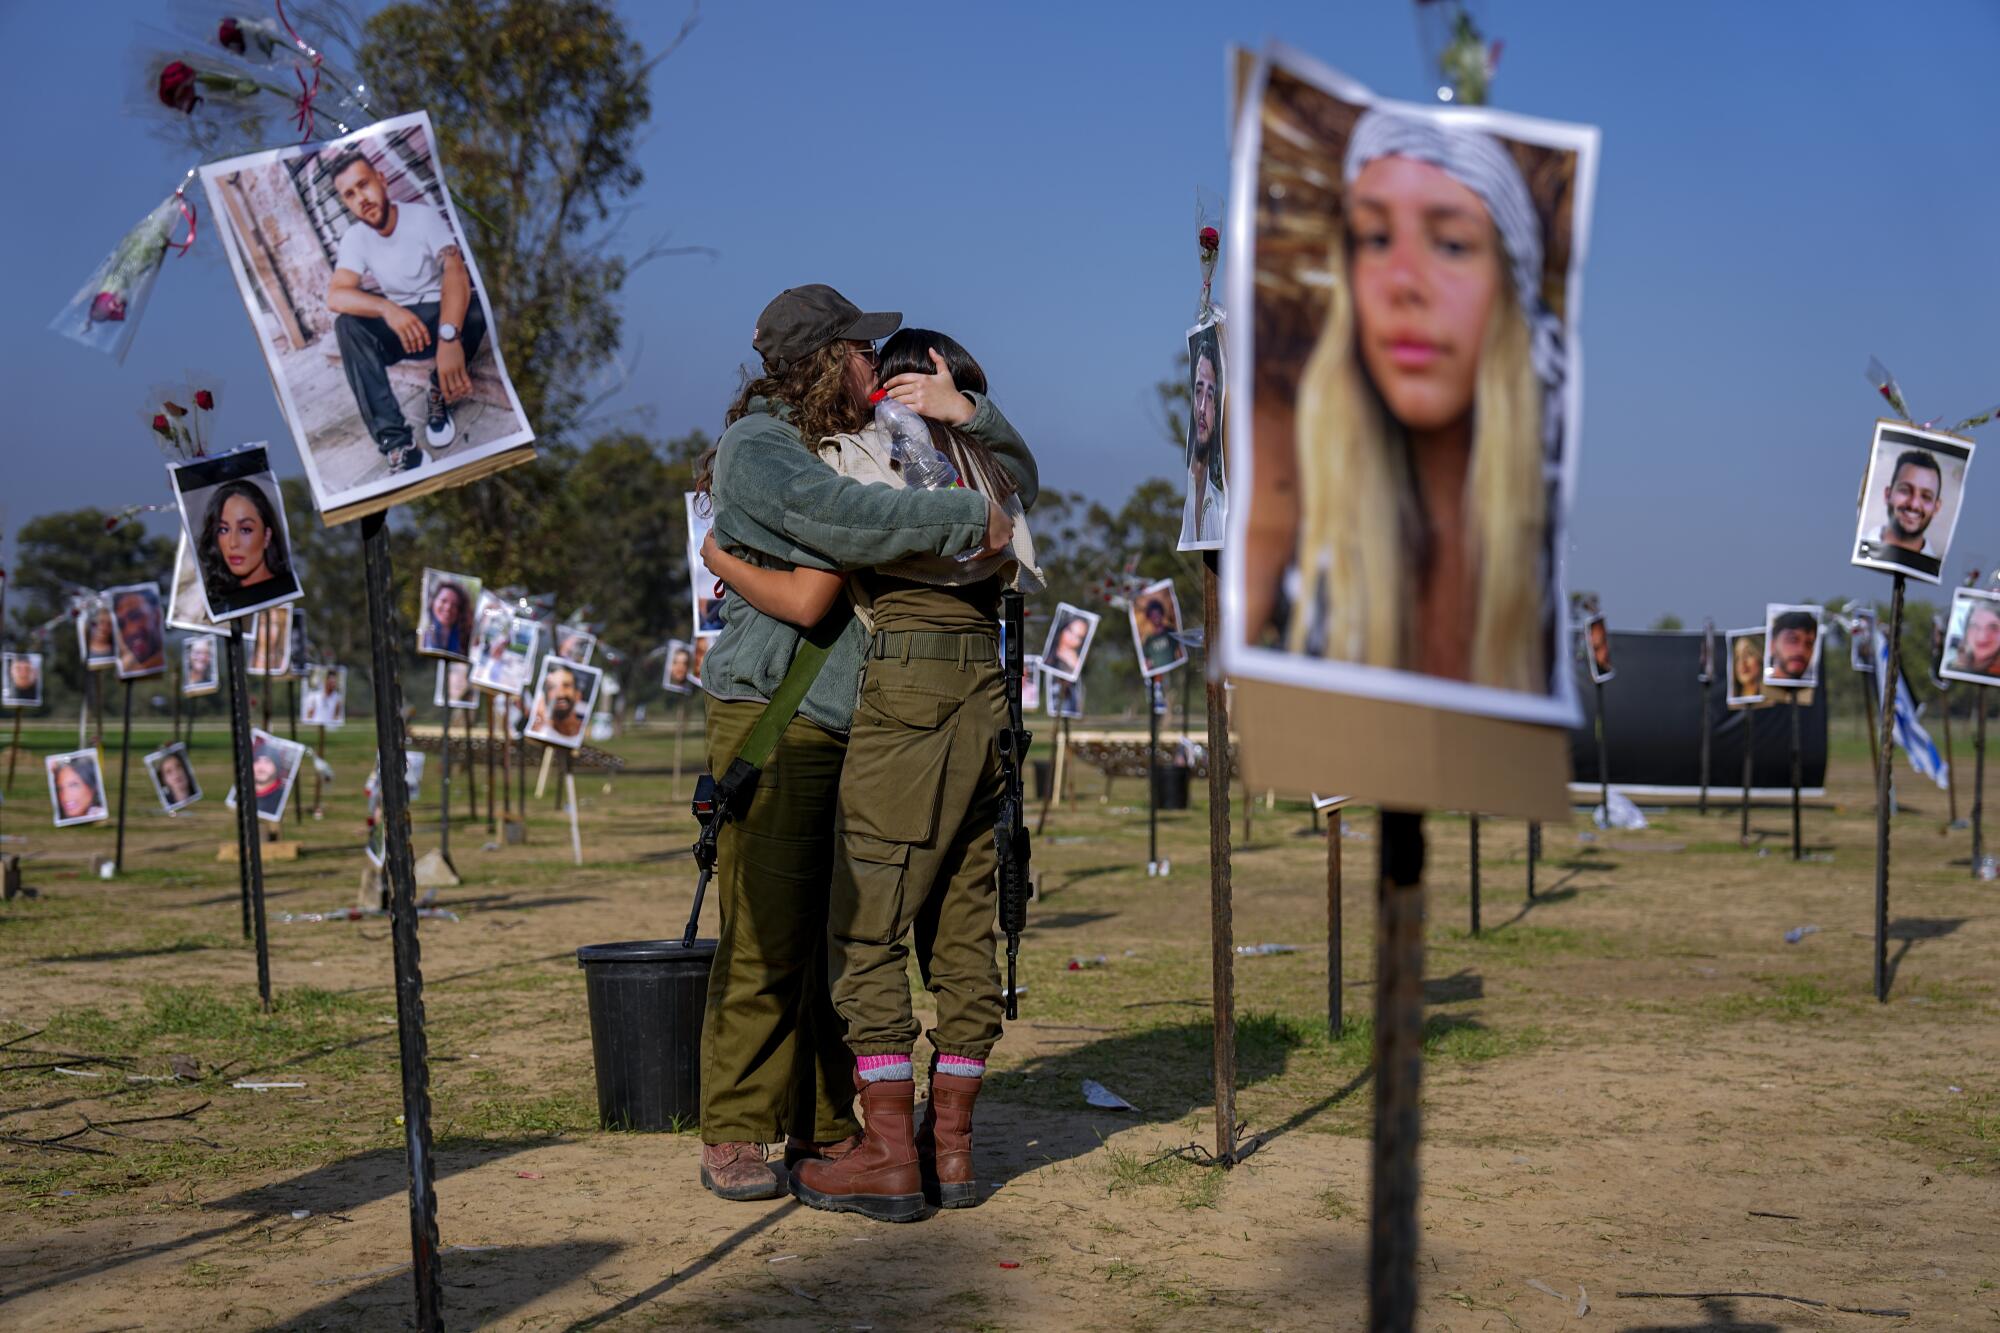 Israeli soldiers embracing next to photos of people killed or taken captive by Hamas